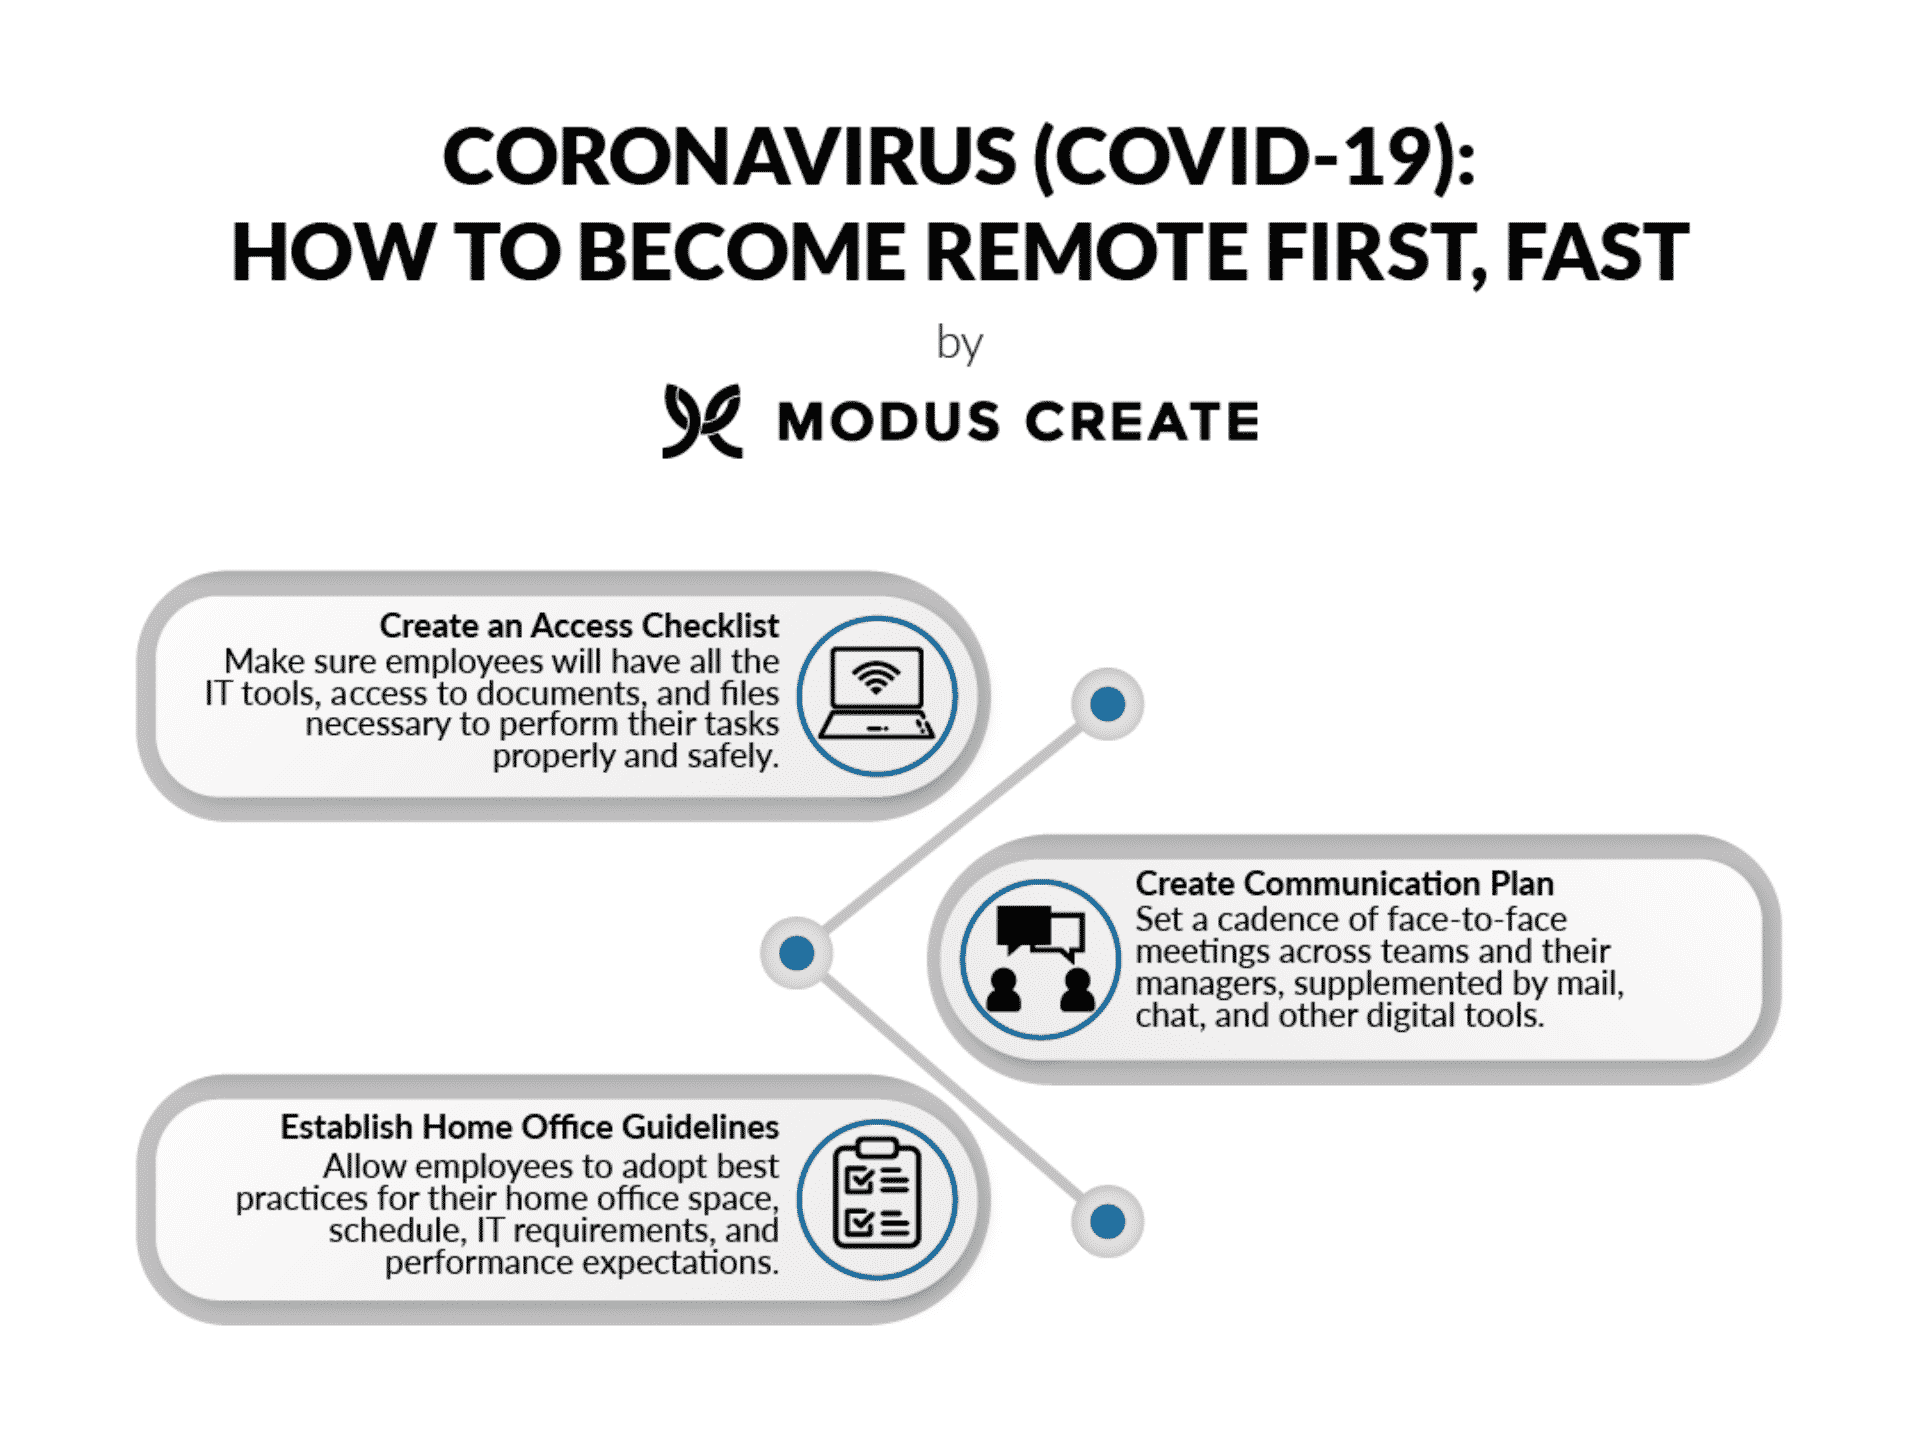 How to Become Remote First Fast for COVID-19